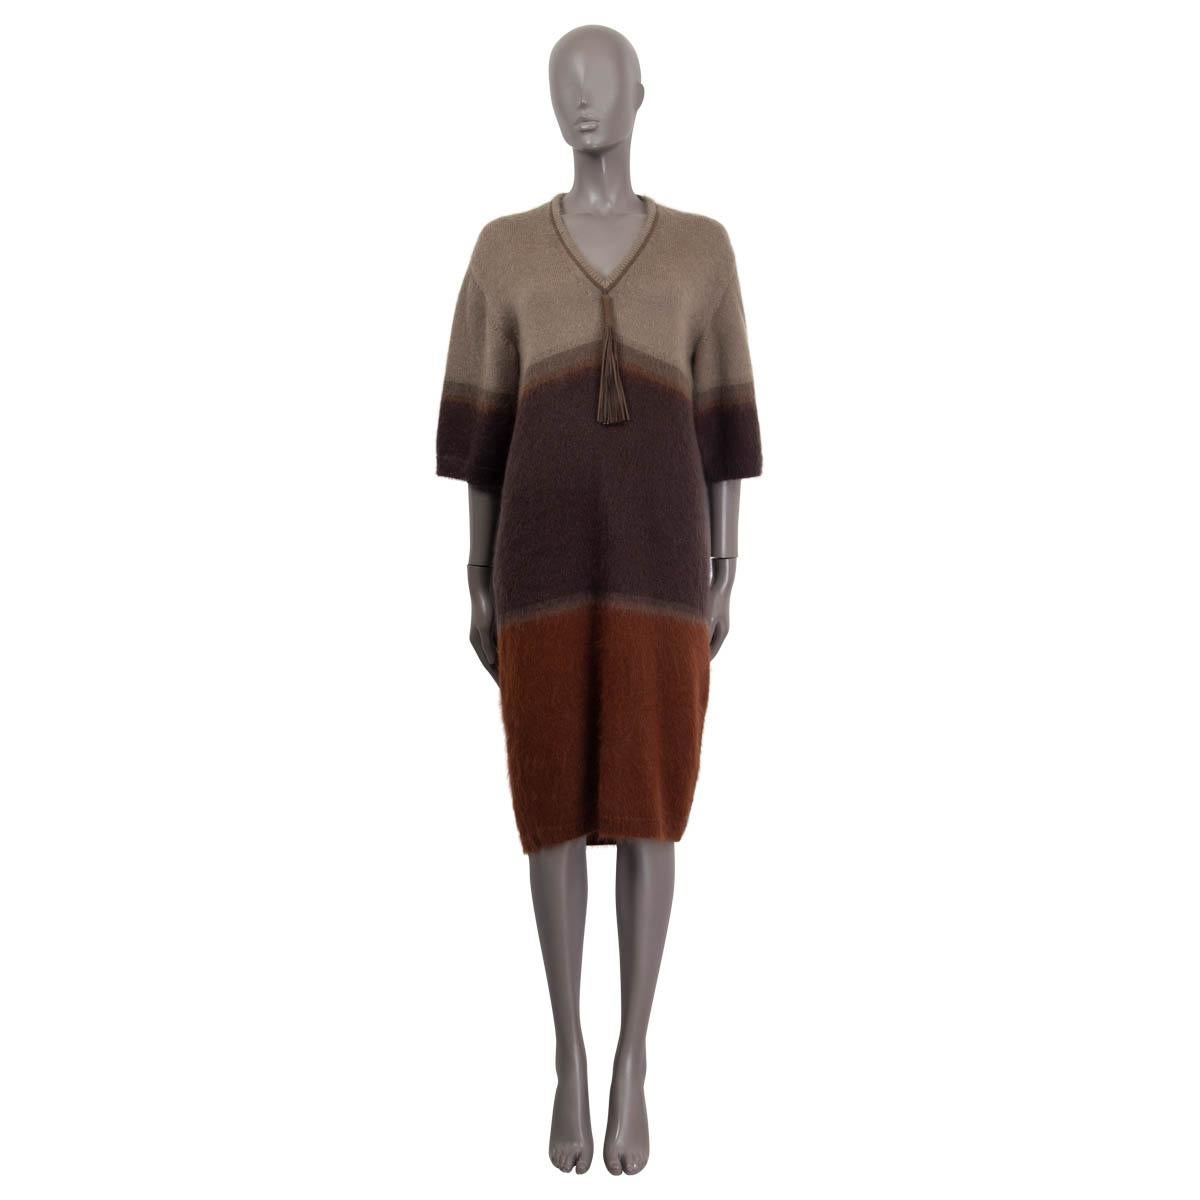 100% authentic Hermés short sleeve dress in sage, brown and gray mohair (37%), silk (37%) and wool (26%). Features details around the v-neck and a tassel in khaki lambskin (100%). Unlined. Has been worn and is in excellent condition.